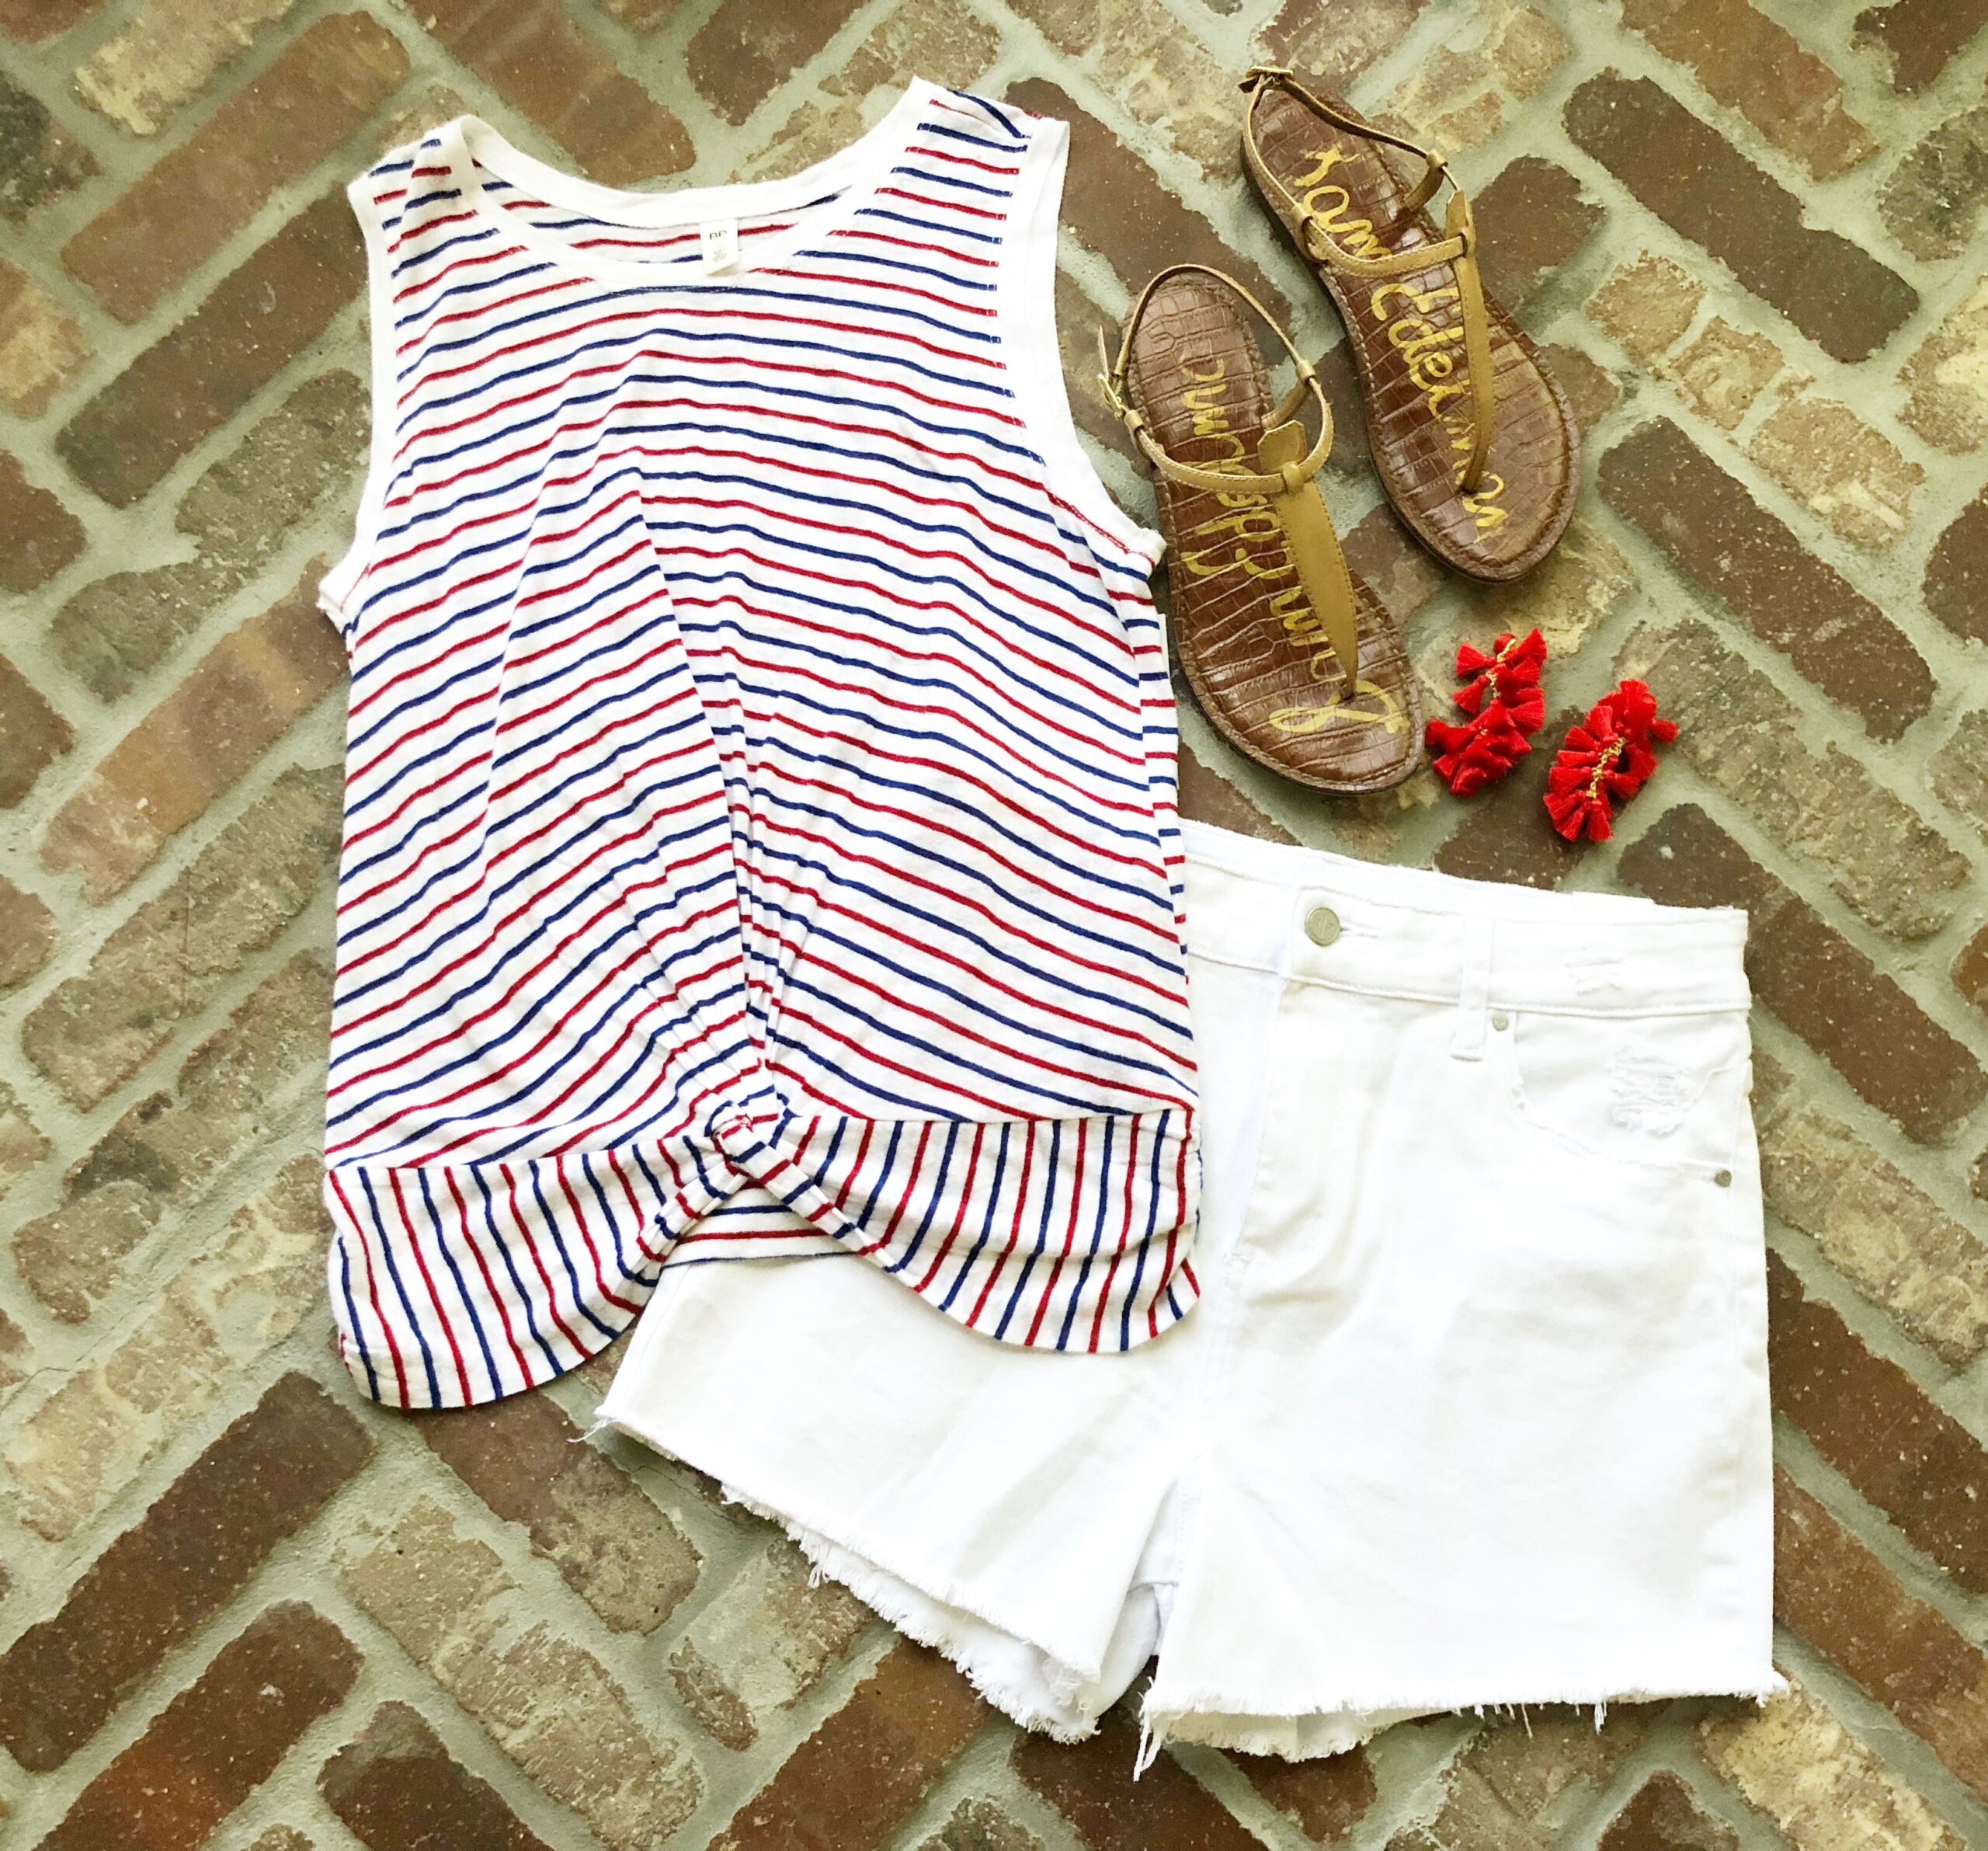 Cute 4th of July Outfit Ideas featured by popular Houston fashion blogger, Fancy Ashley